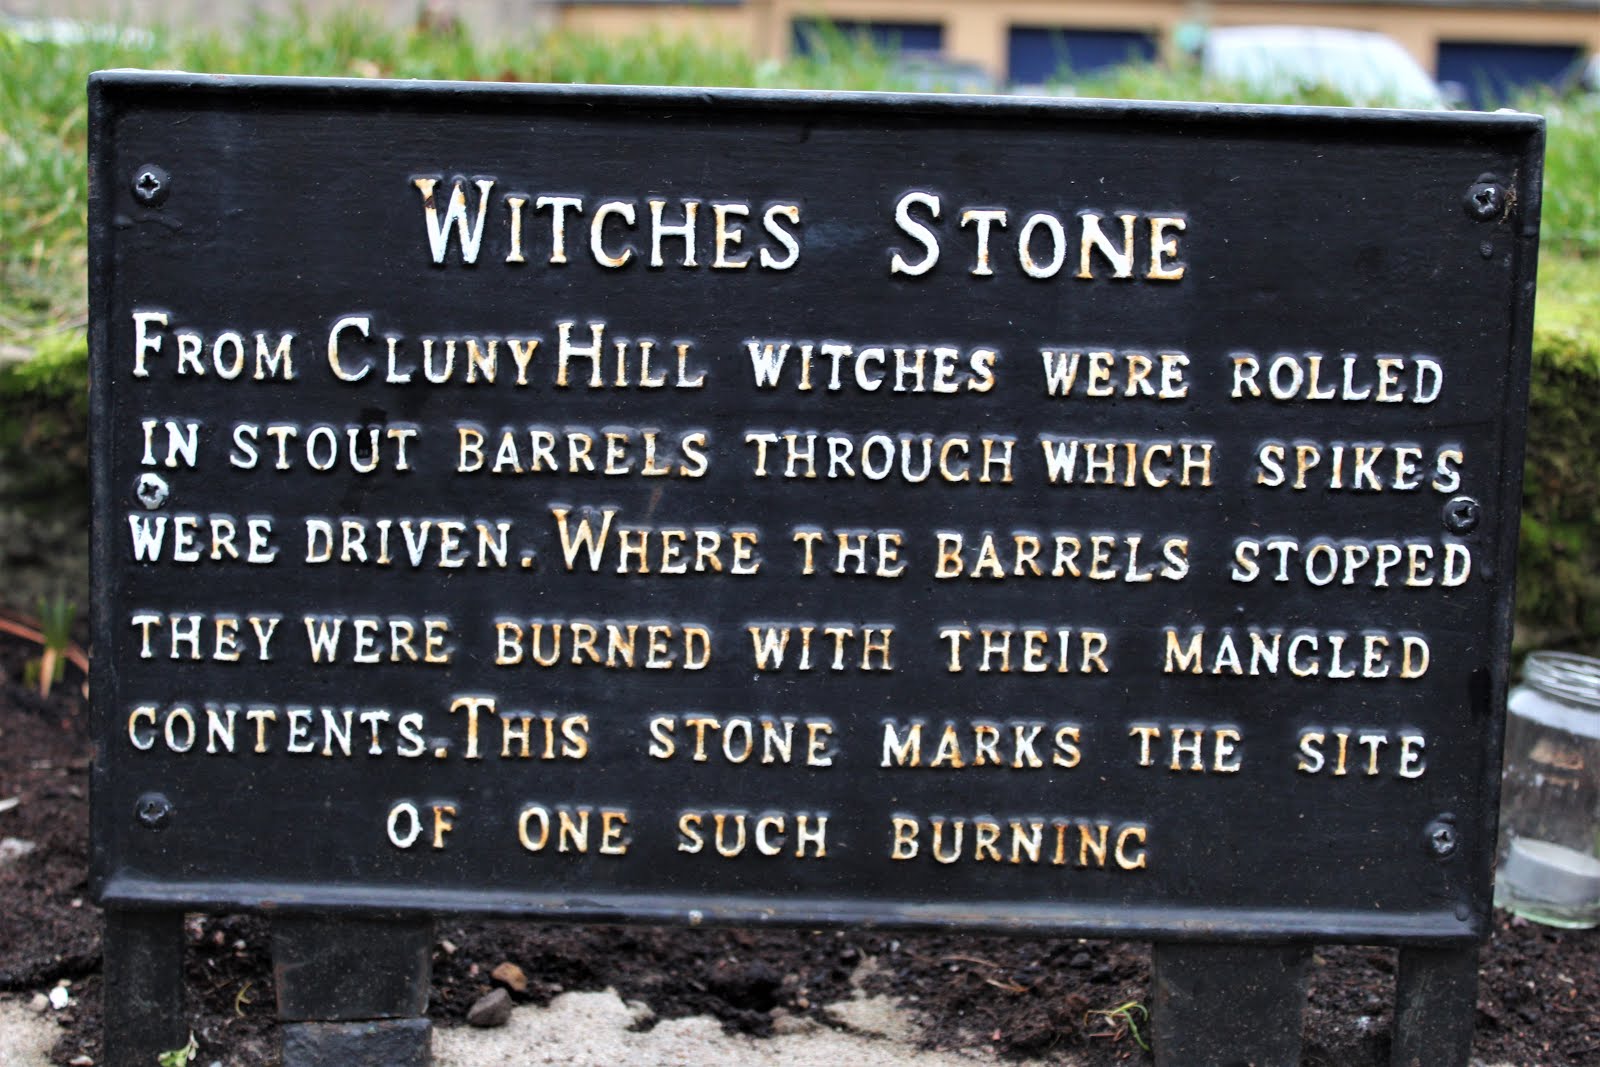 The mysteries of Cluny Hill